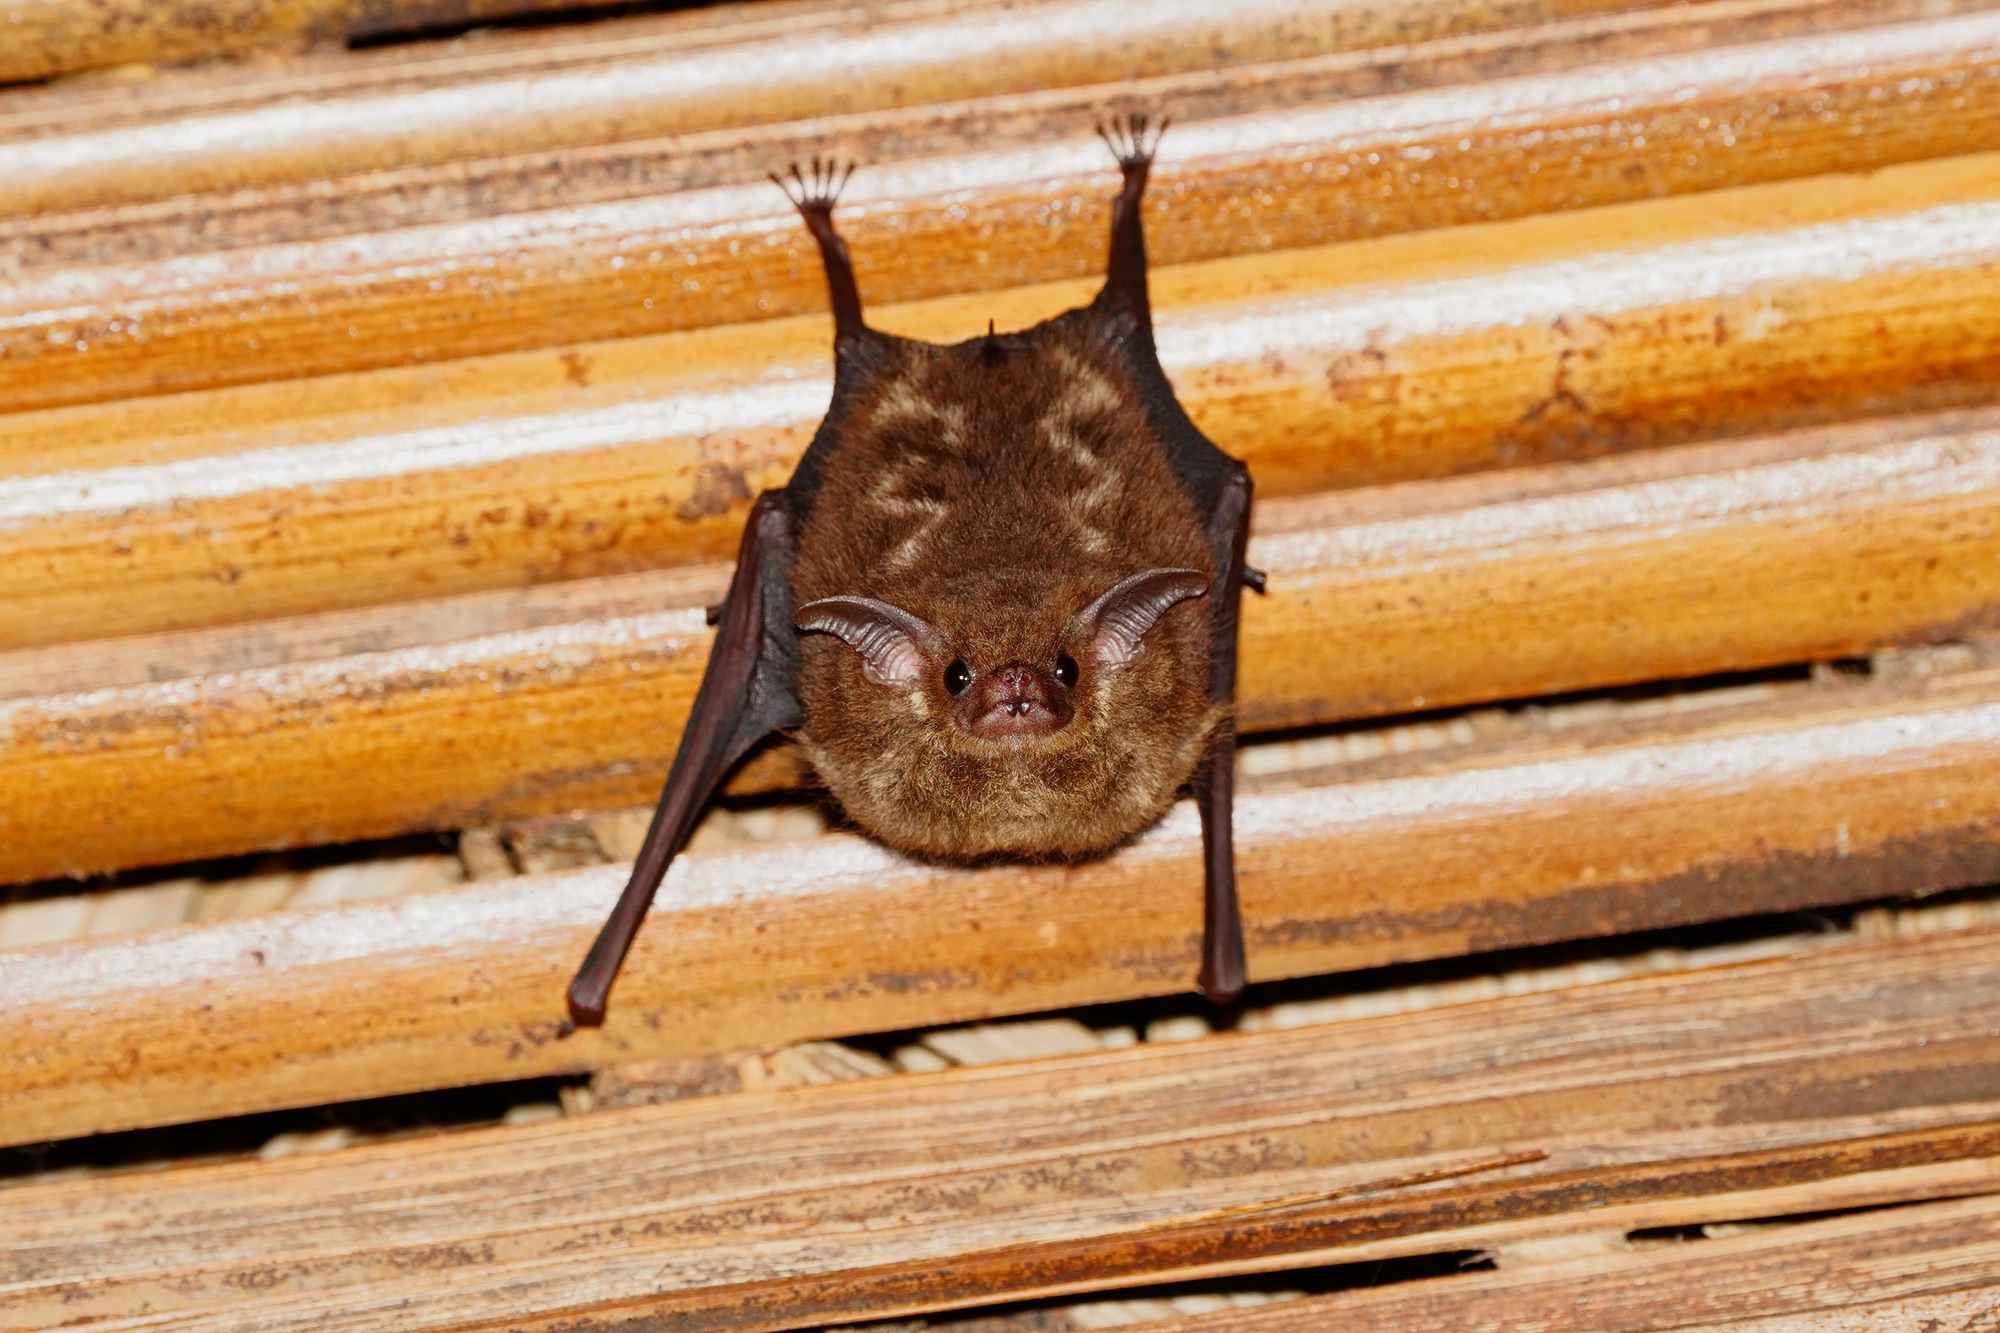 Costa Rica photo tour with Don Mammoser - Brown bat